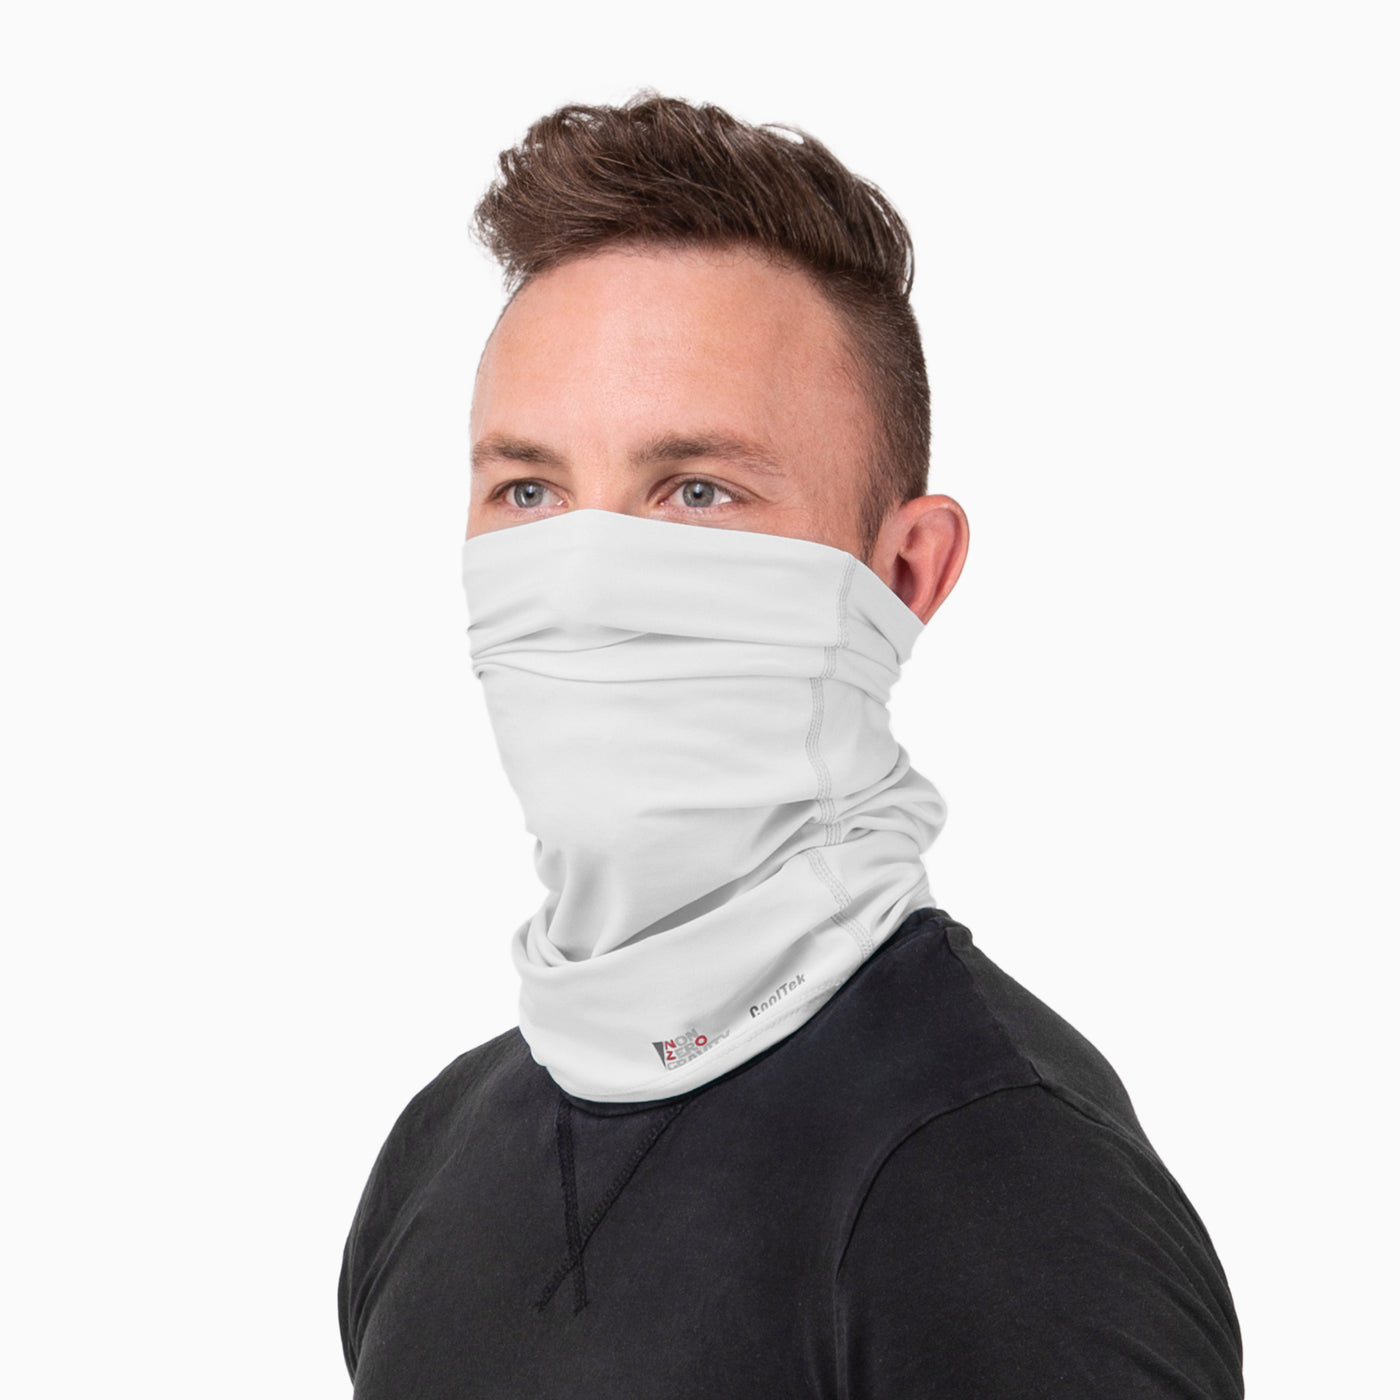 a white spandex athletic neck gaiter to mask and protect your face